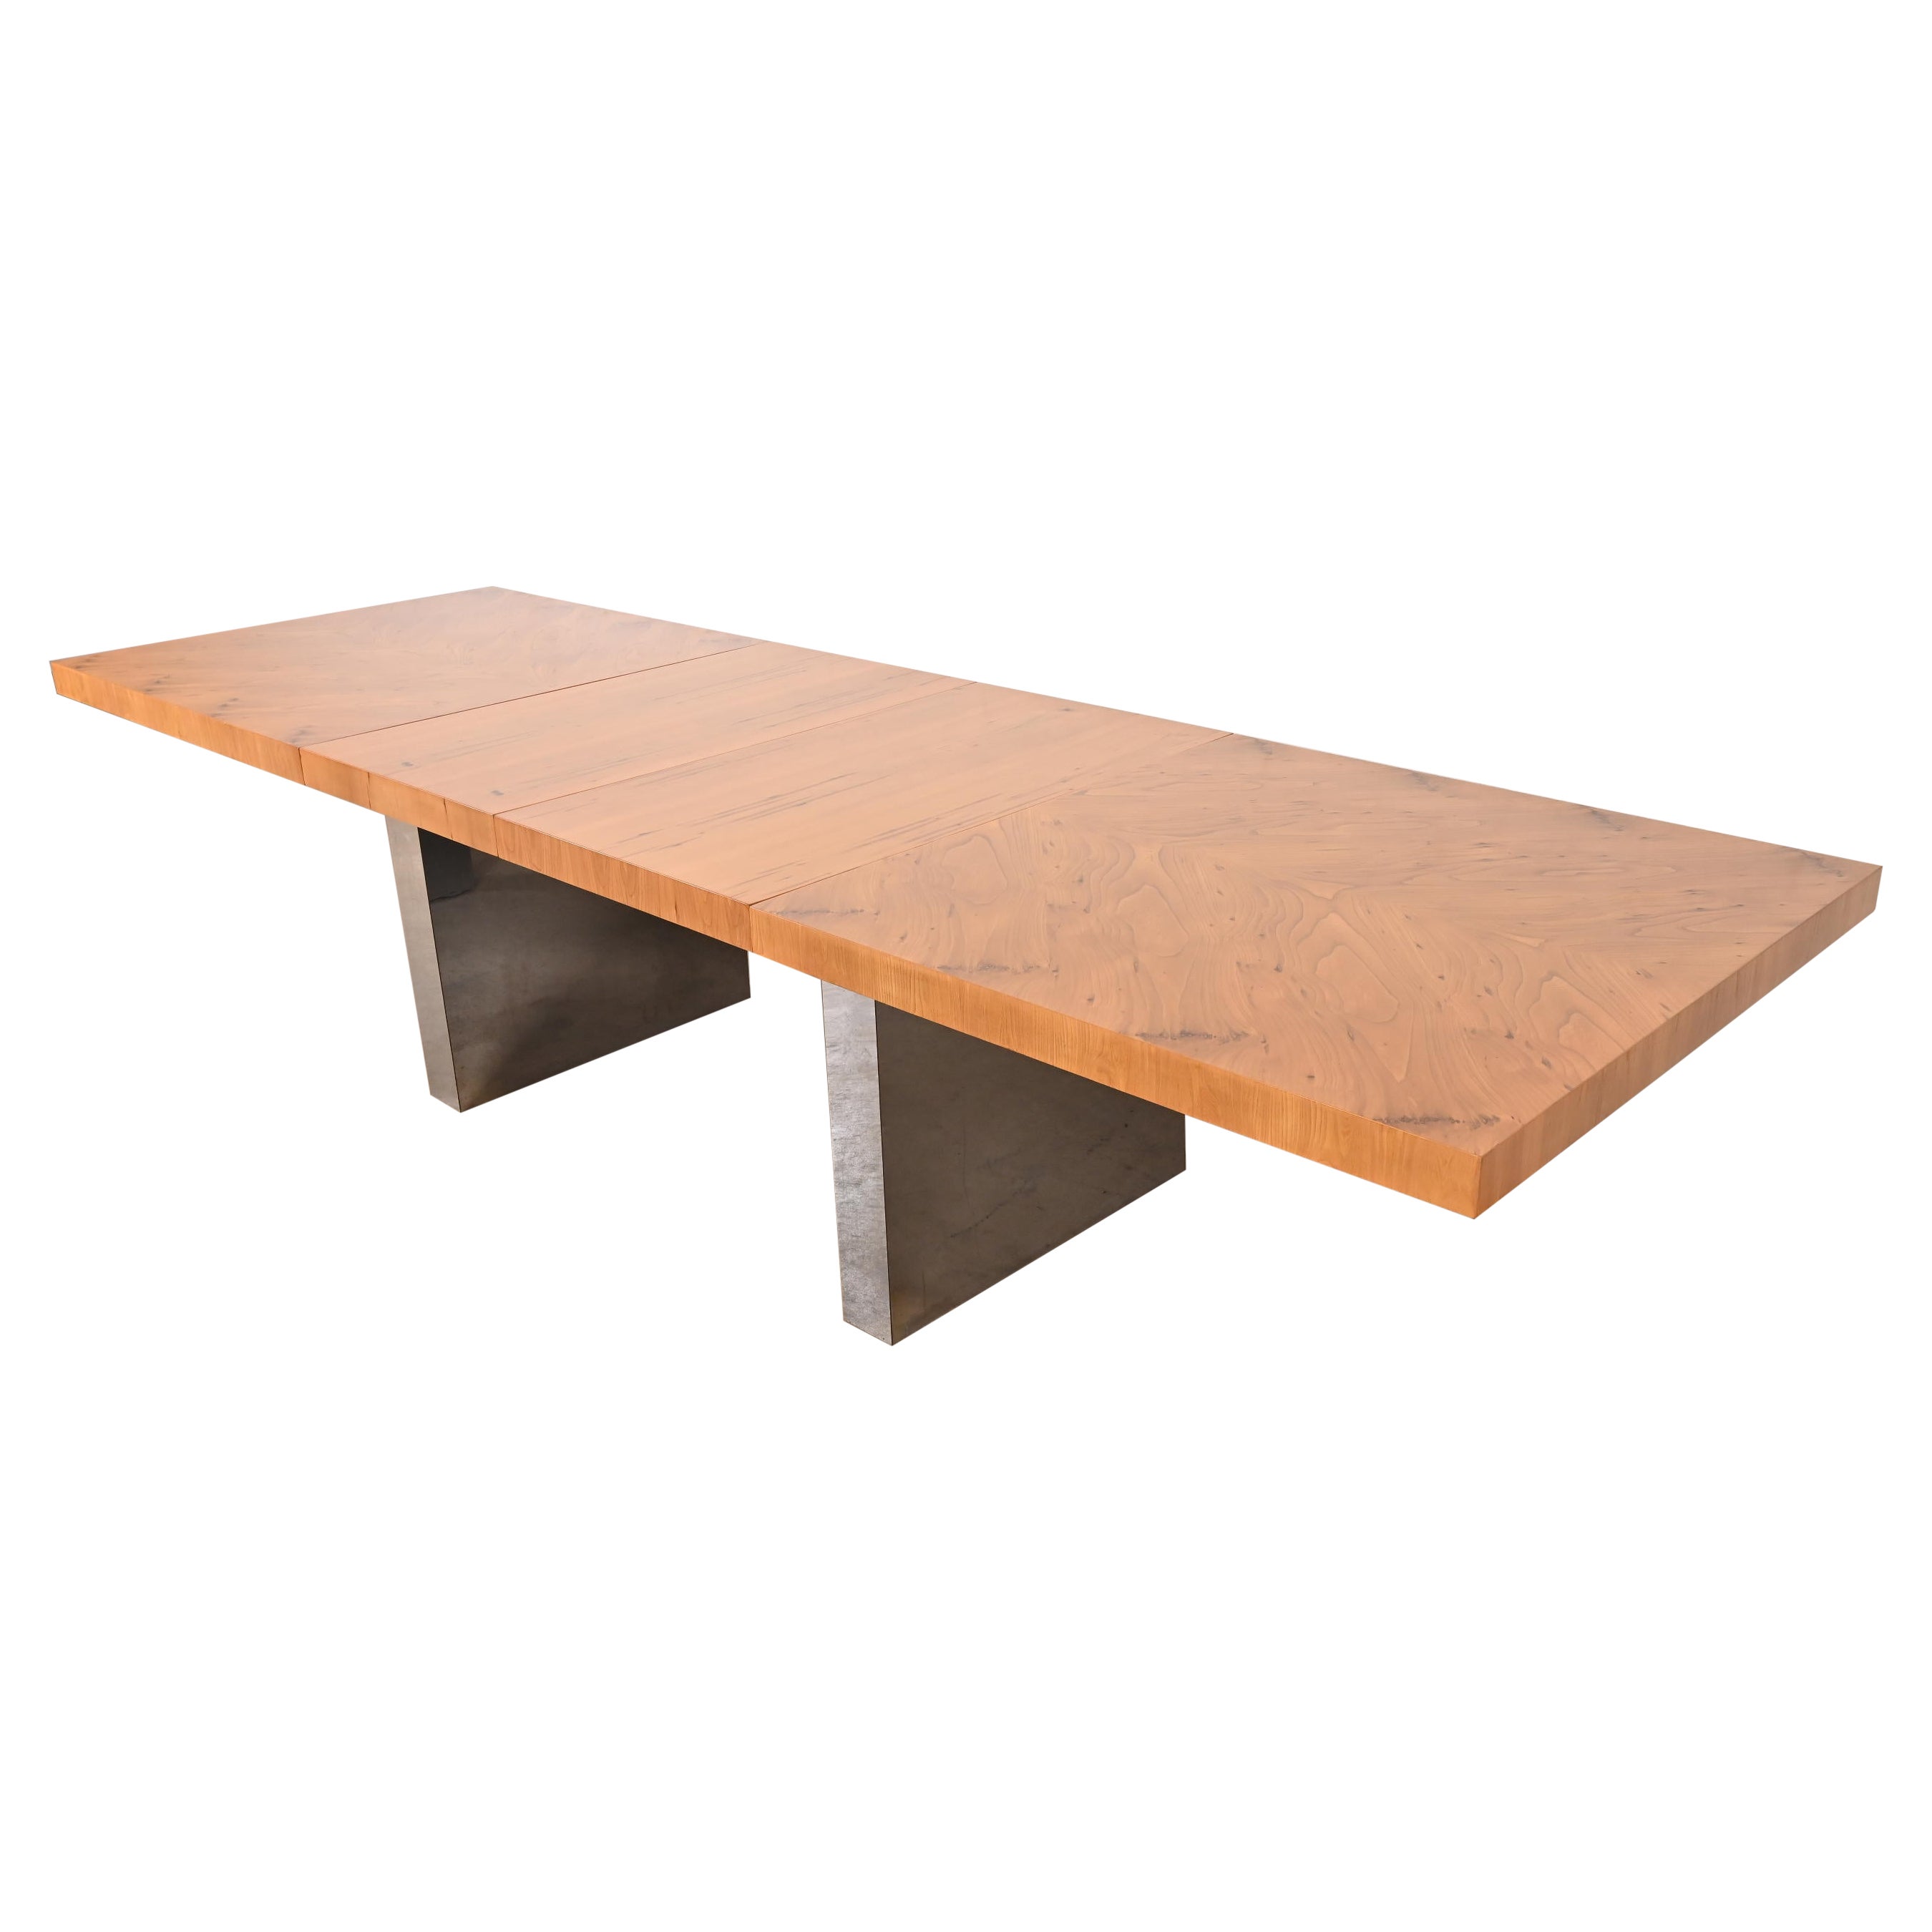 Milo Baughman for Thayer Coggin Burl Wood and Chrome Dining Table, Refinished